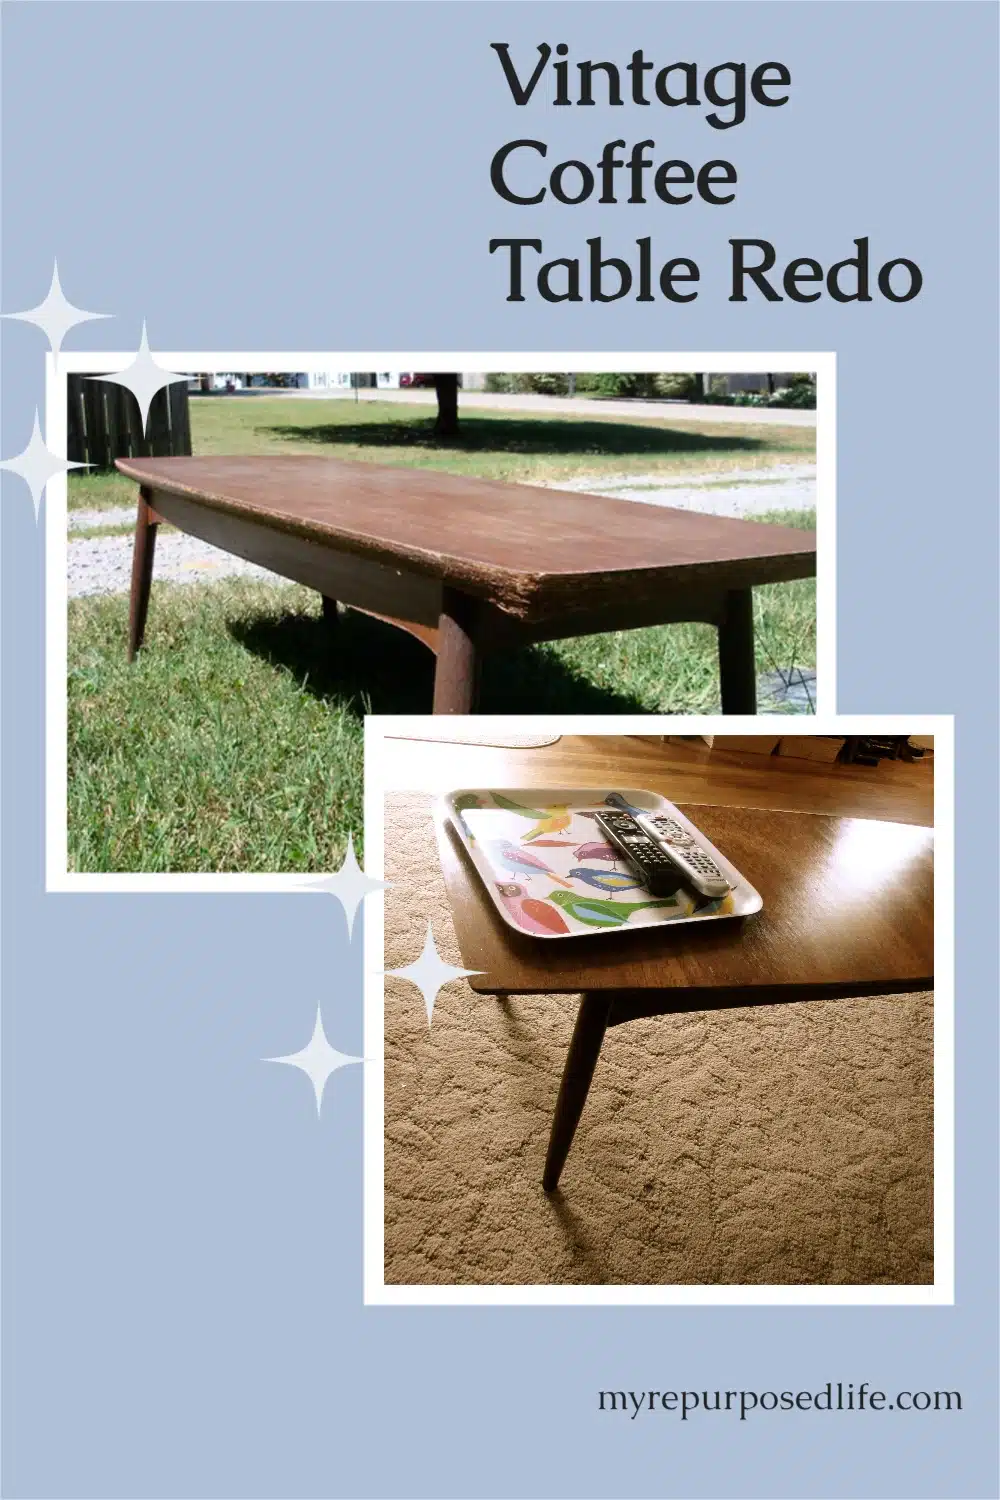 How to give a damaged vintage coffee table a new top and a new lease on life! Ten years later, the table is still hanging in there in it's new home. The table is probably going on 60-70 years old! They don't make them like this anymore. #myrepurposedlife #table #makeover via @repurposedlife